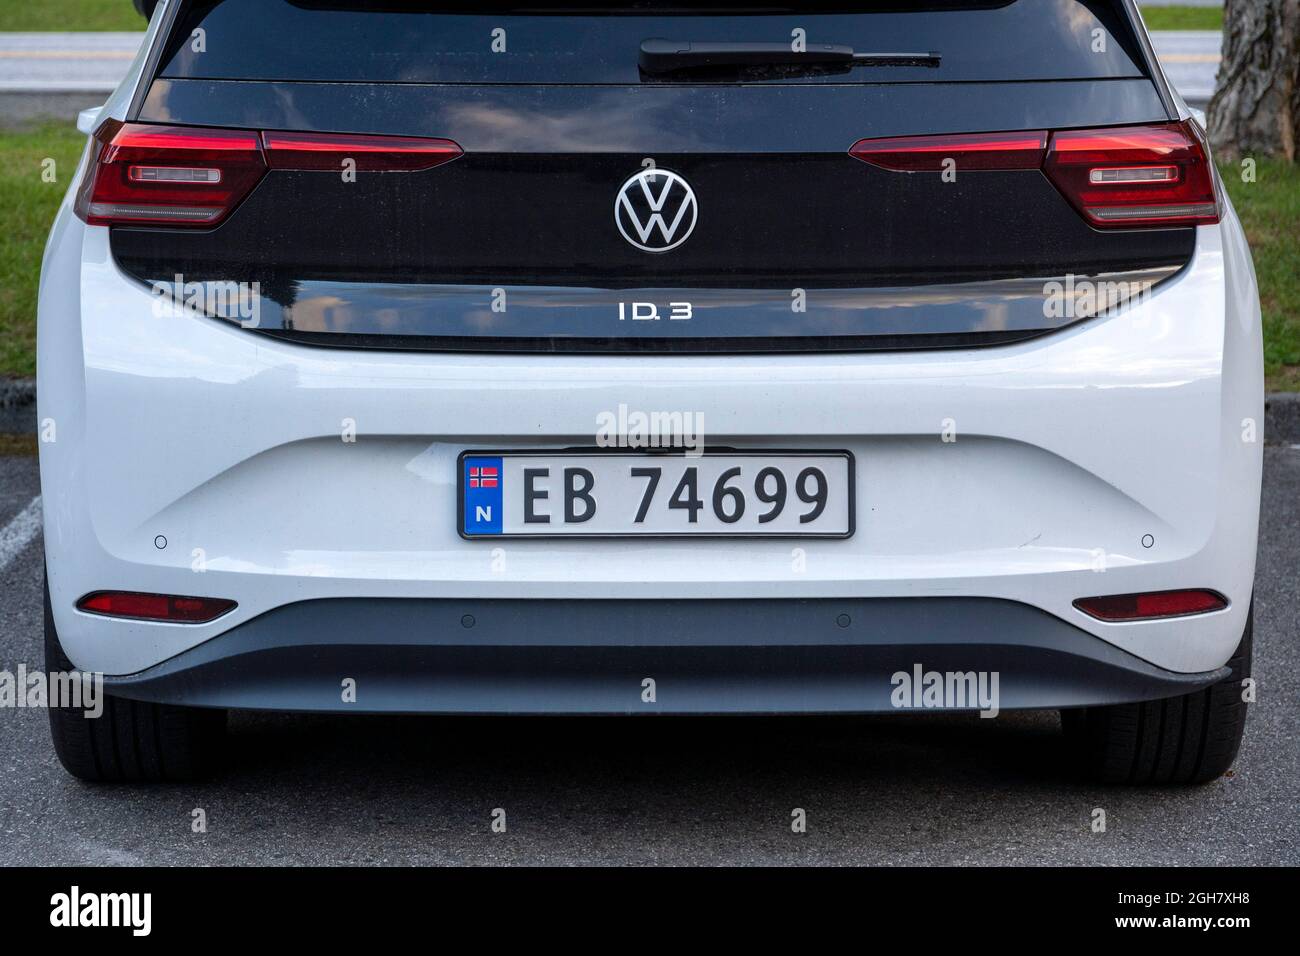 Volkswagen ID.3 electric car with Norwegian license plate Stock Photo